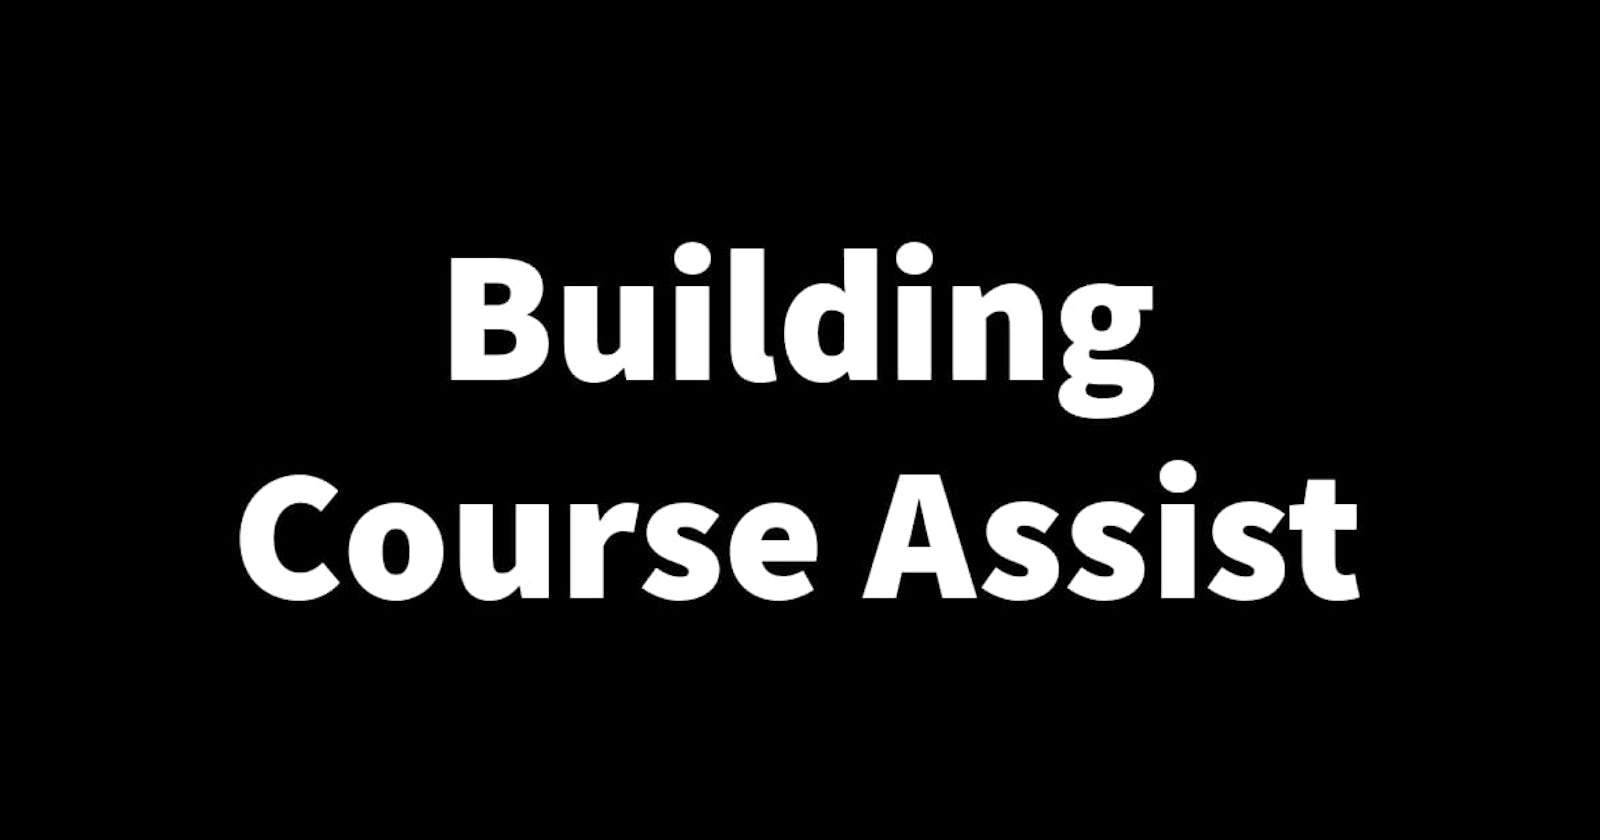 Building Course Assist Part 7: Adding some final features and bug fixes (1/2).